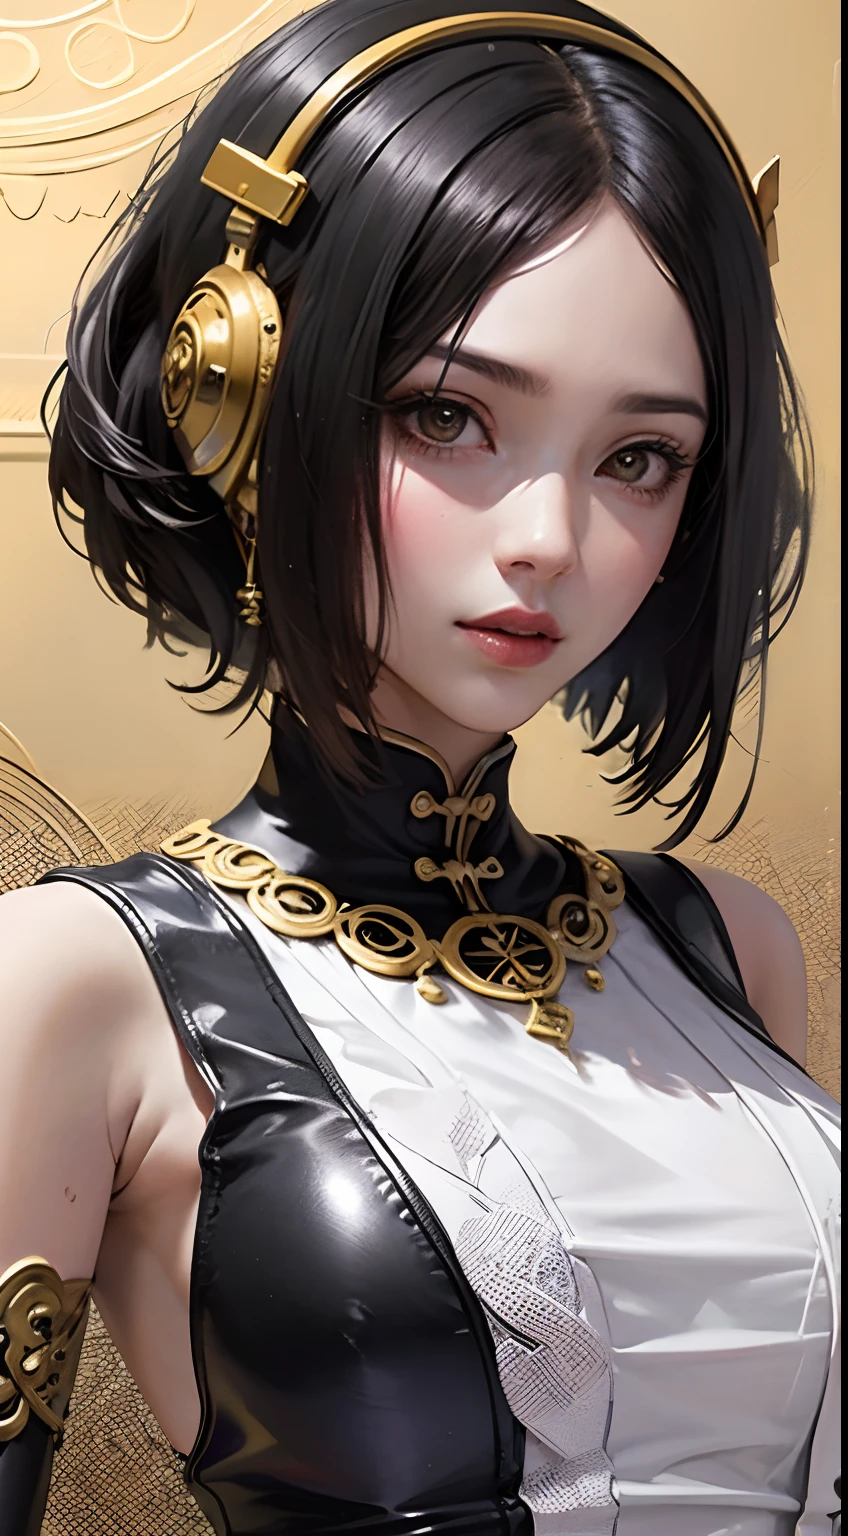 （tmasterpiece，top Quority，best qualtiy，offcial art，Beautiful and aesthetic：1.2），（1girl huge large breasts），waist - up，Tang suit，Hanfu，cyber punk style，mechs，Extremely detailed，Colorful，highestdetailed，offcial art，Unity 8k wallpaper，Ultra-detail，Beautiful and aesthetic，beatifull，tmasterpiece，best qualtiy，（zentangle，a Mandala，Tangles，Entangled），Sacred Radiance，gold foil，Gold leaf art，glitter drawing，PerfectNwsjMajic、Shorthair